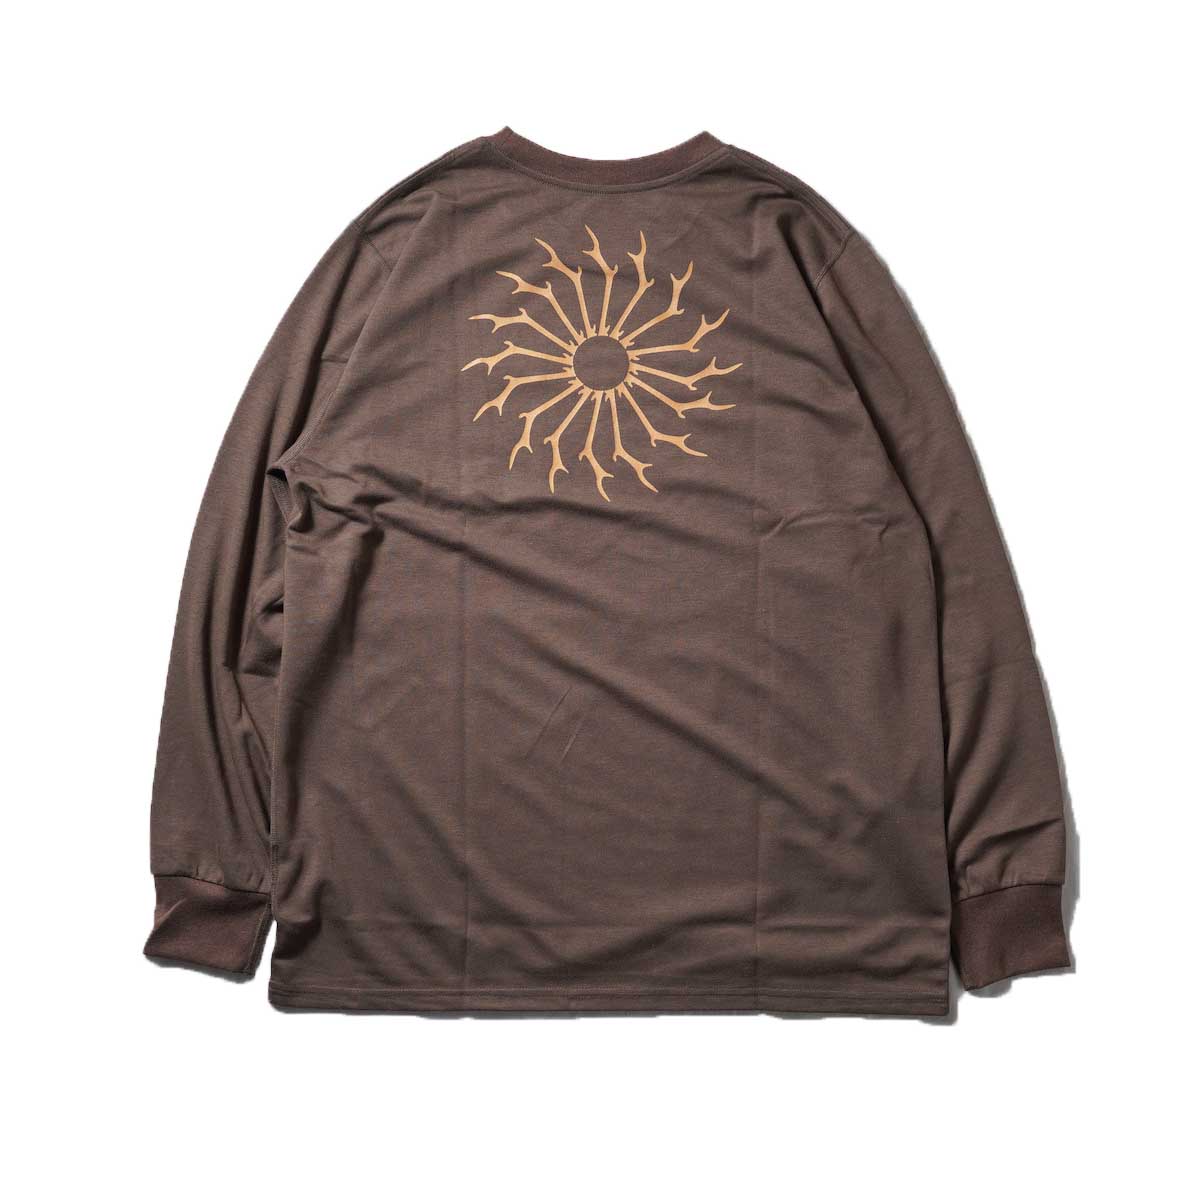 South2 West8 / L/S Round Pocket Tee -Circle Horn (Brown)背面